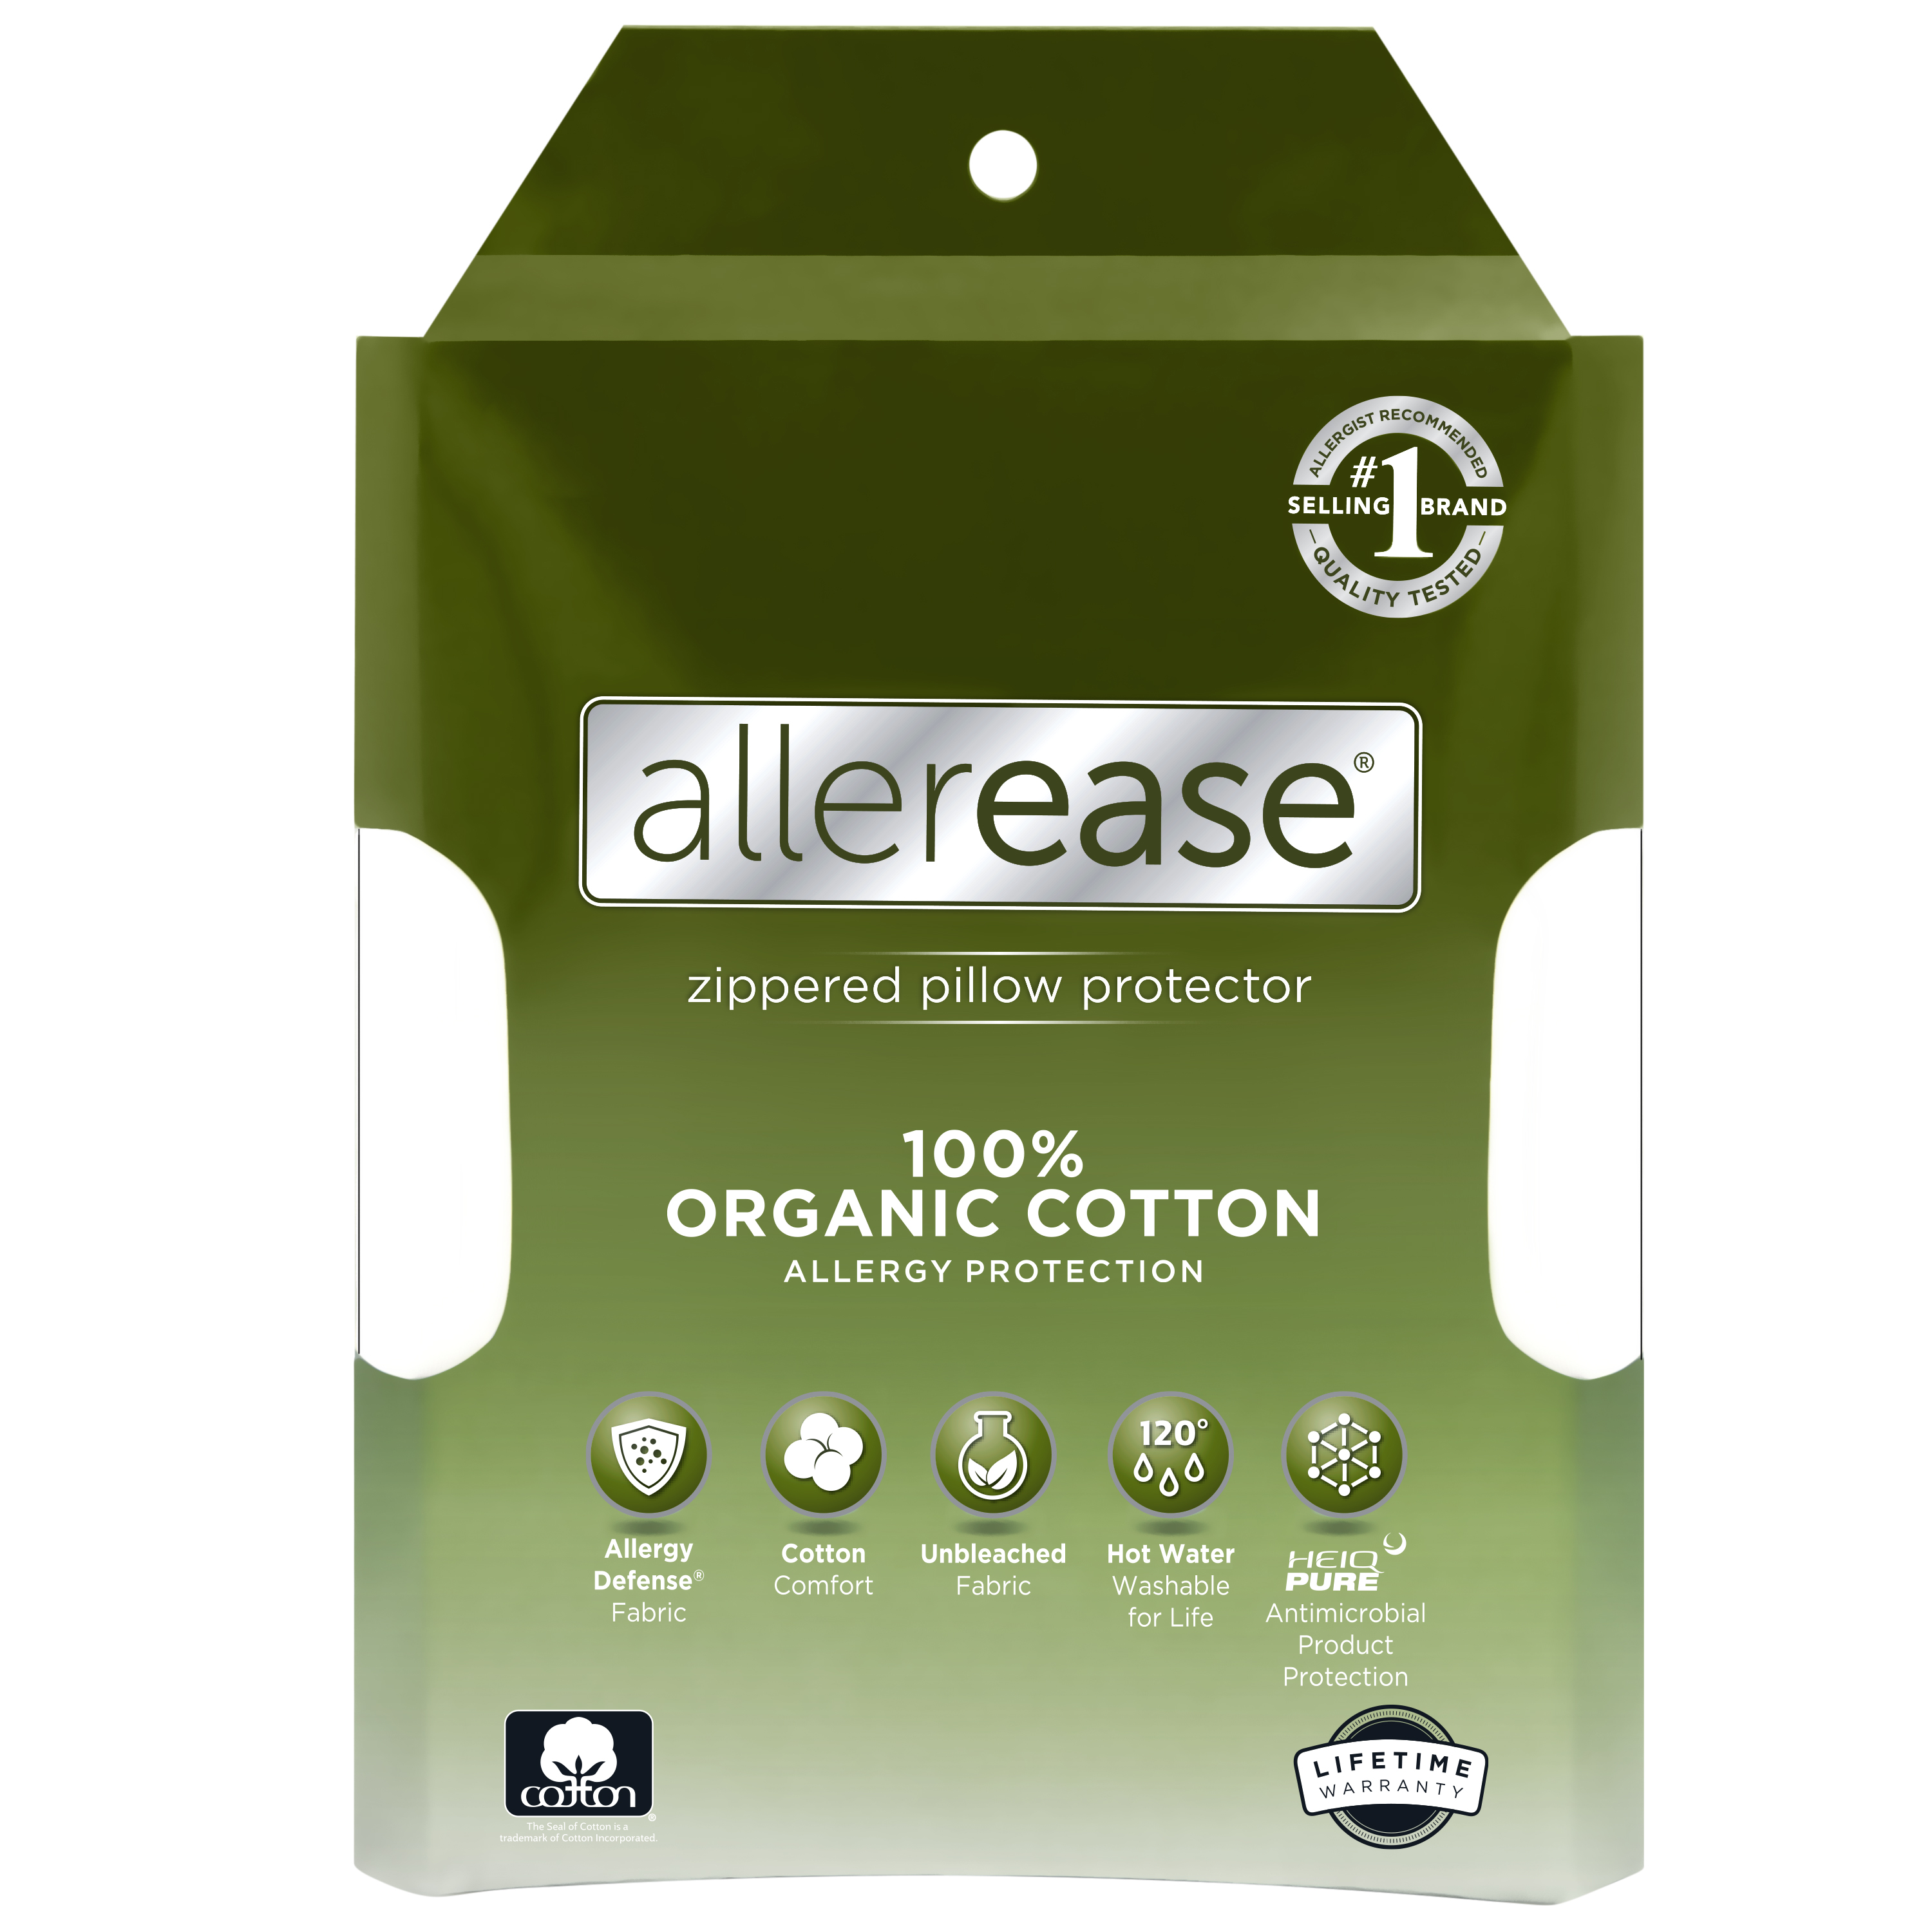 Allerease Organic Cotton Zippered Pillow Protector, Standard/Queen - image 1 of 7